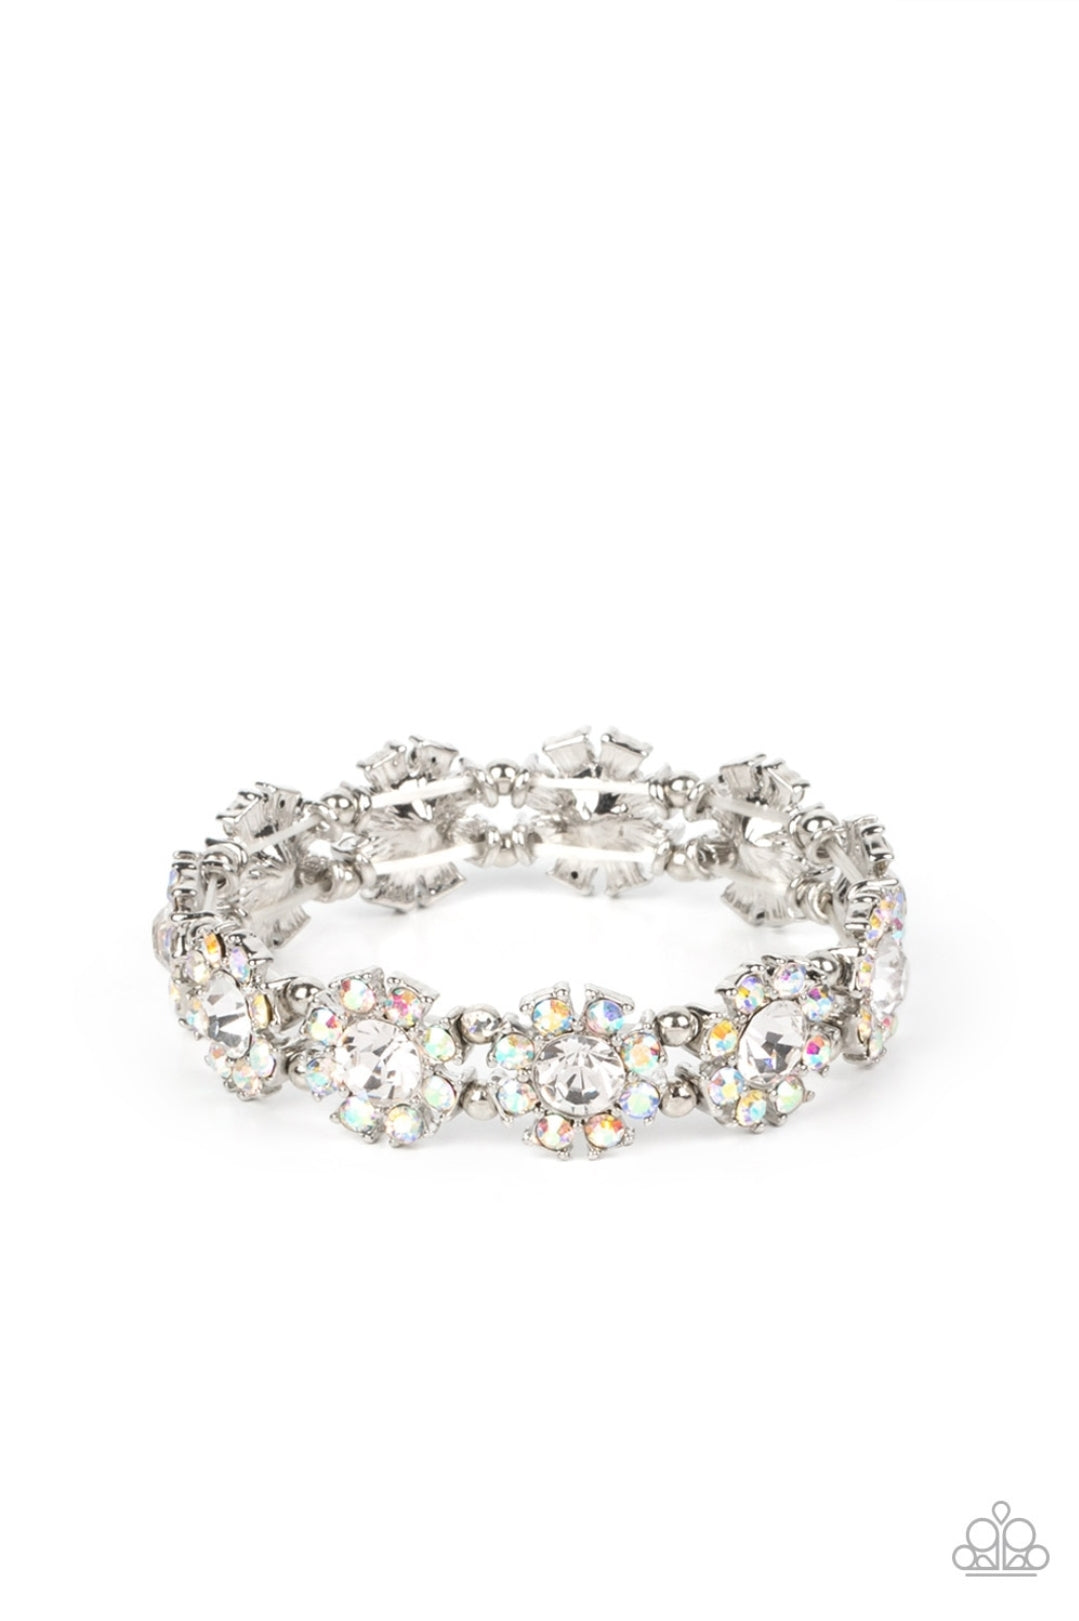 Premium Perennial Multi Bracelet July 2022 Life of the Party Exclusive - Princess Glam Shop